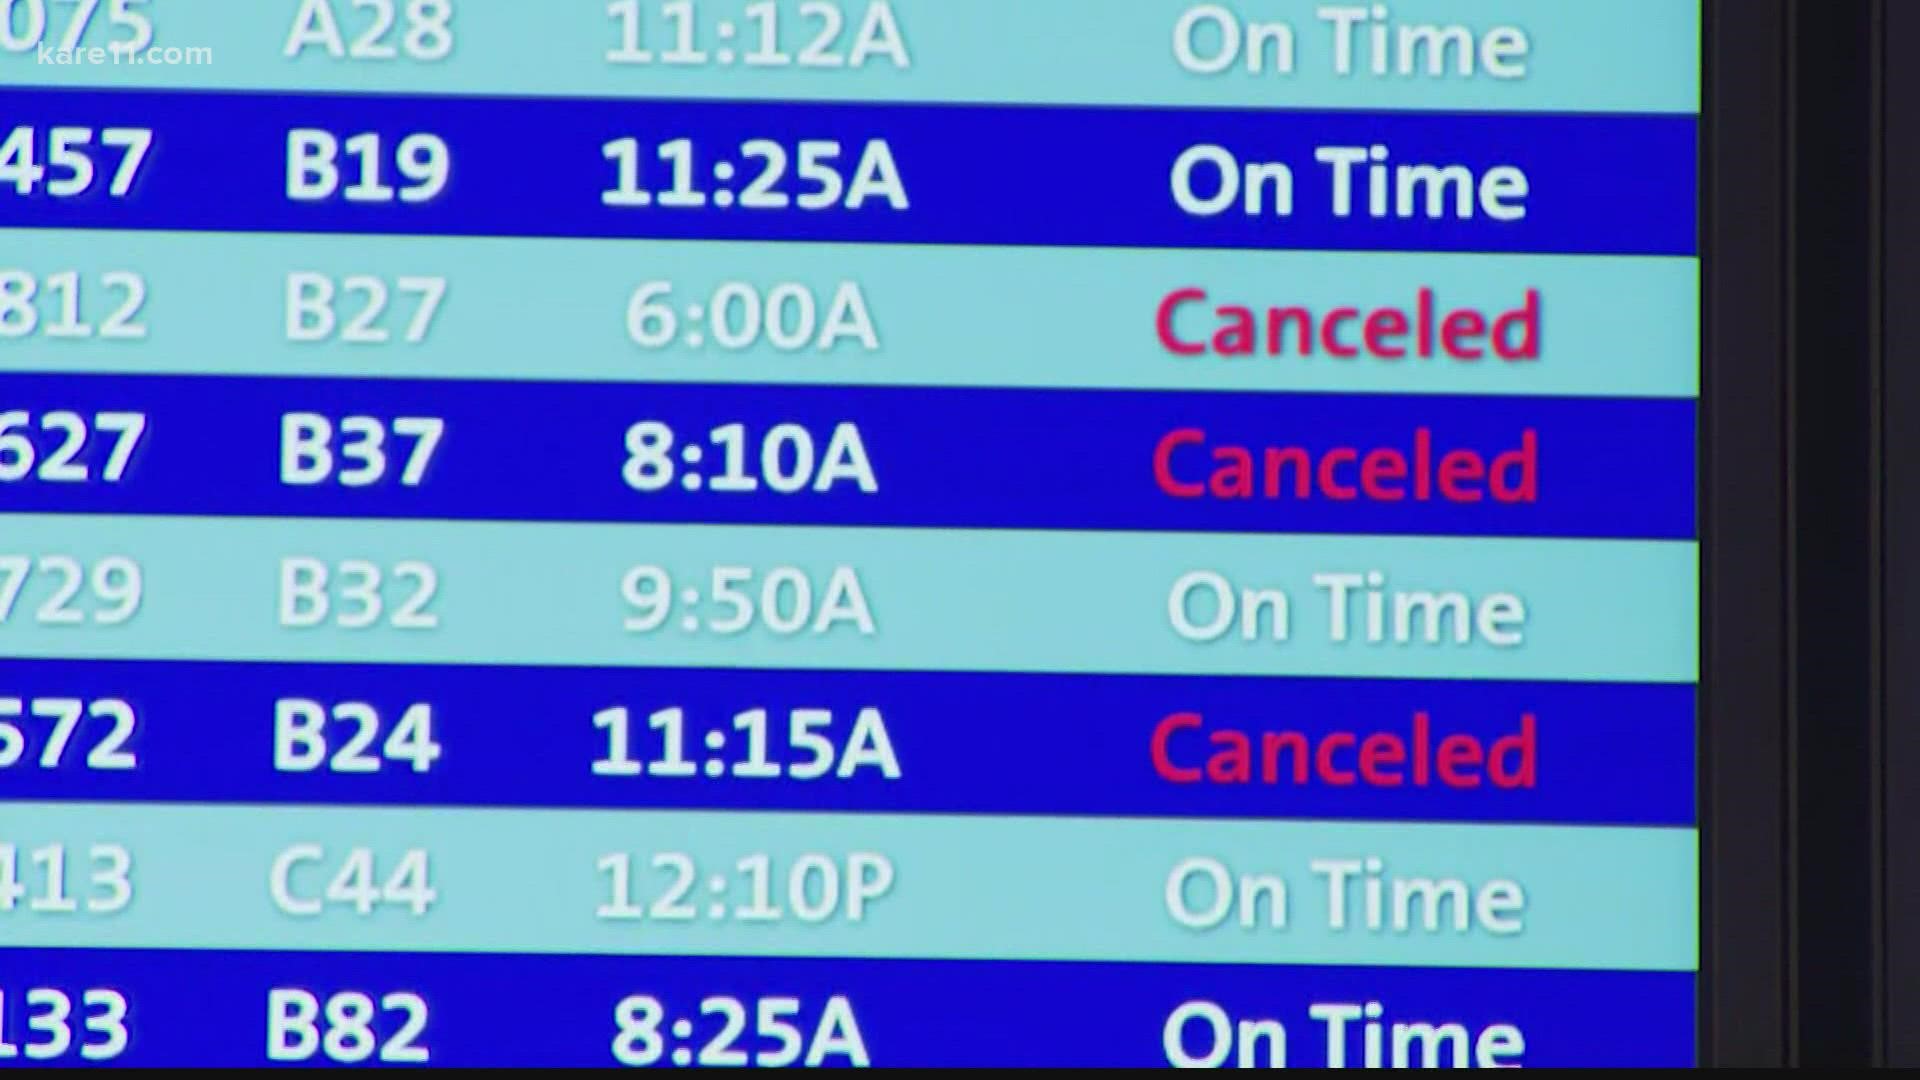 More than 60 flights at MSP were canceled as of Saturday morning, and hundreds more around the country due staffing shortages from the omicron variant.